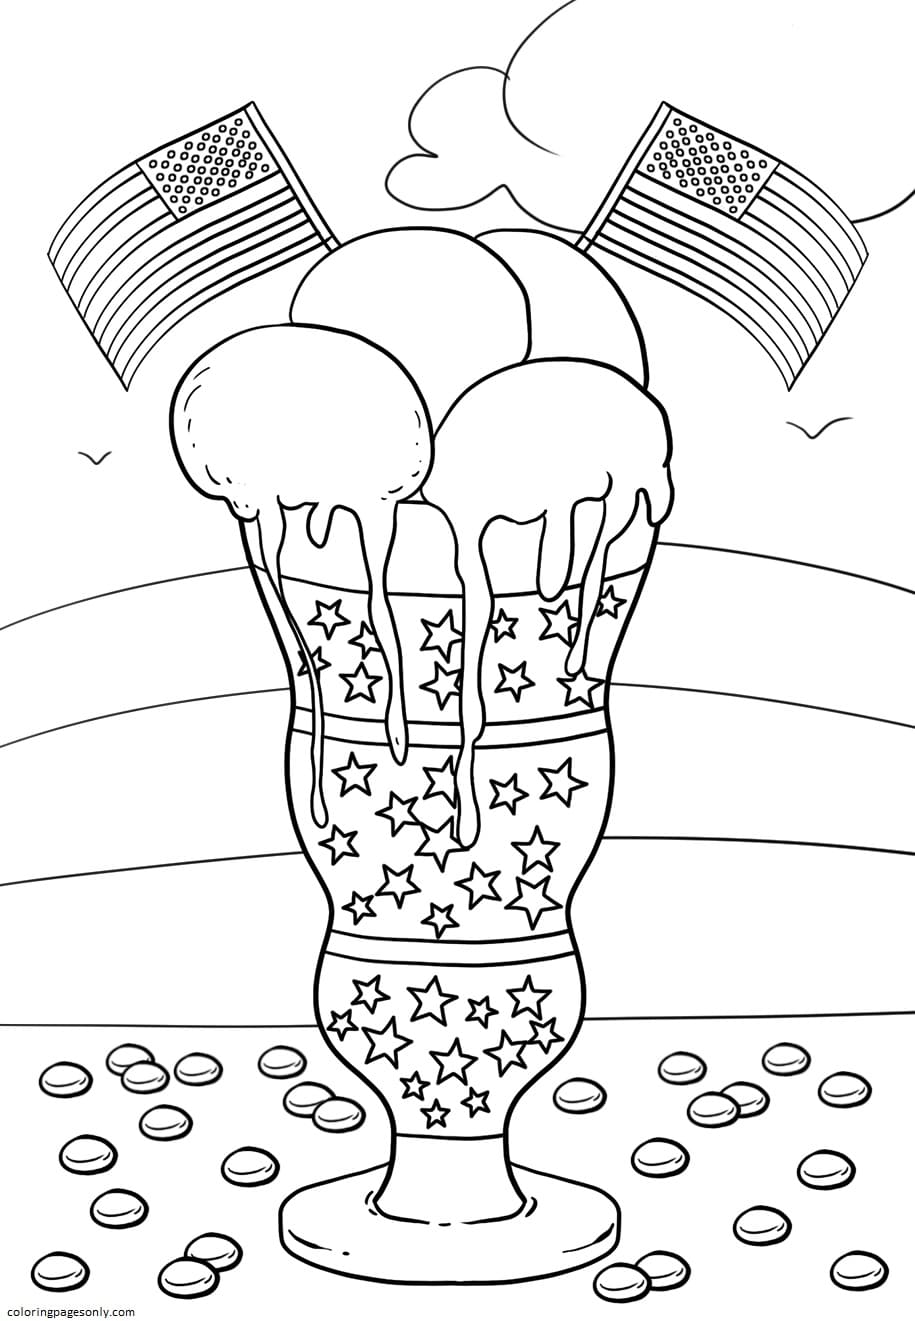 4th of July Coloring Page